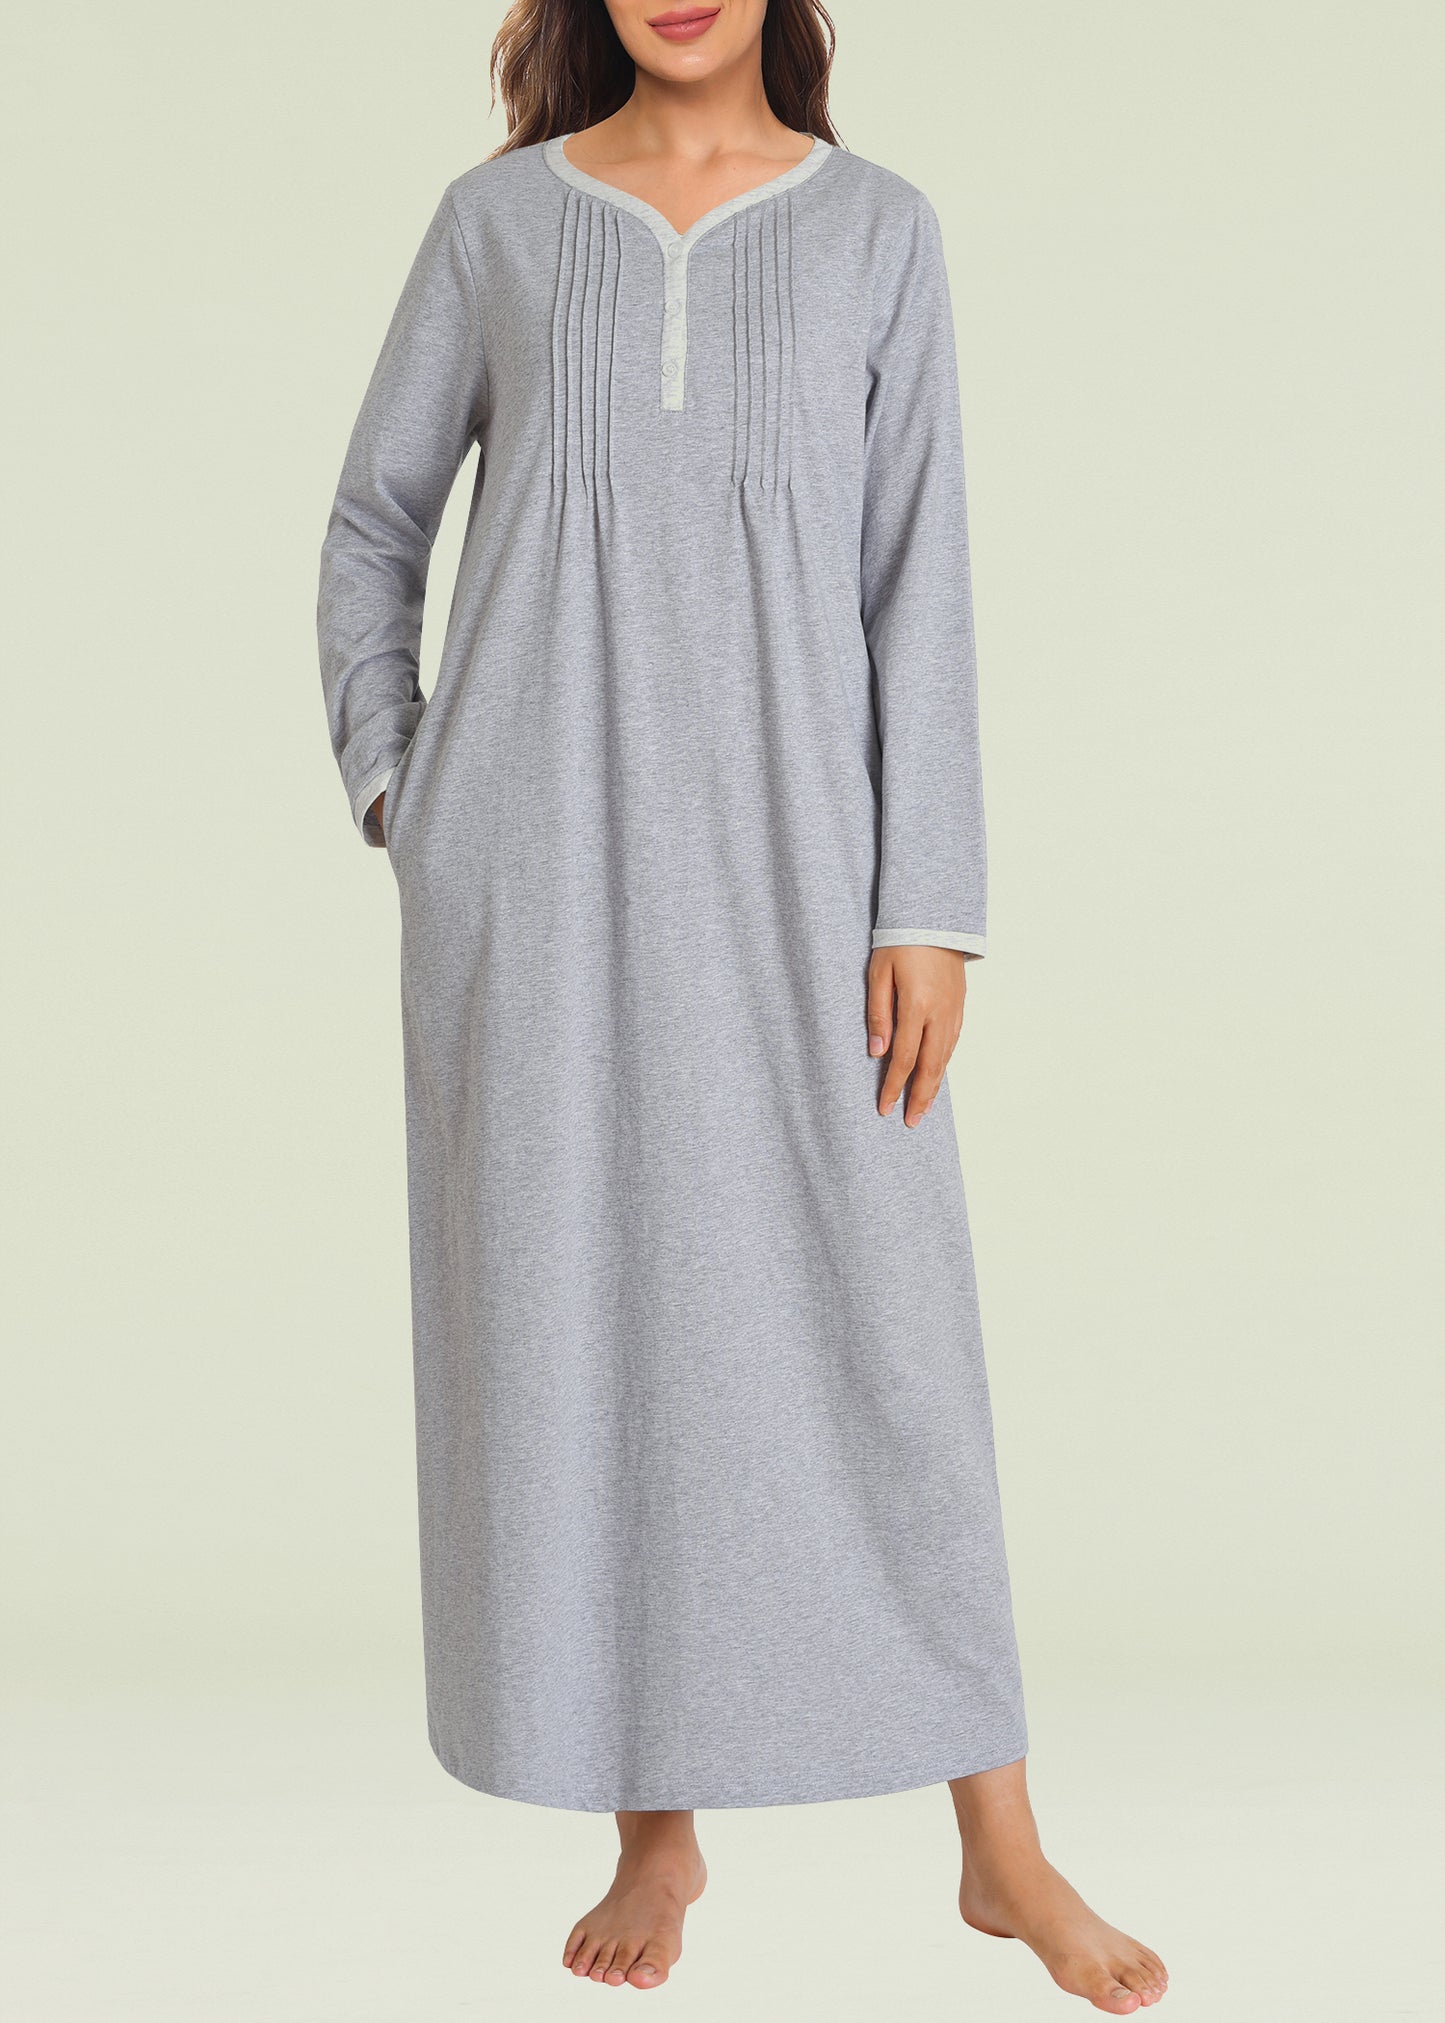 Women's Long Sleeve Nightgown Cotton Sleeping Gown